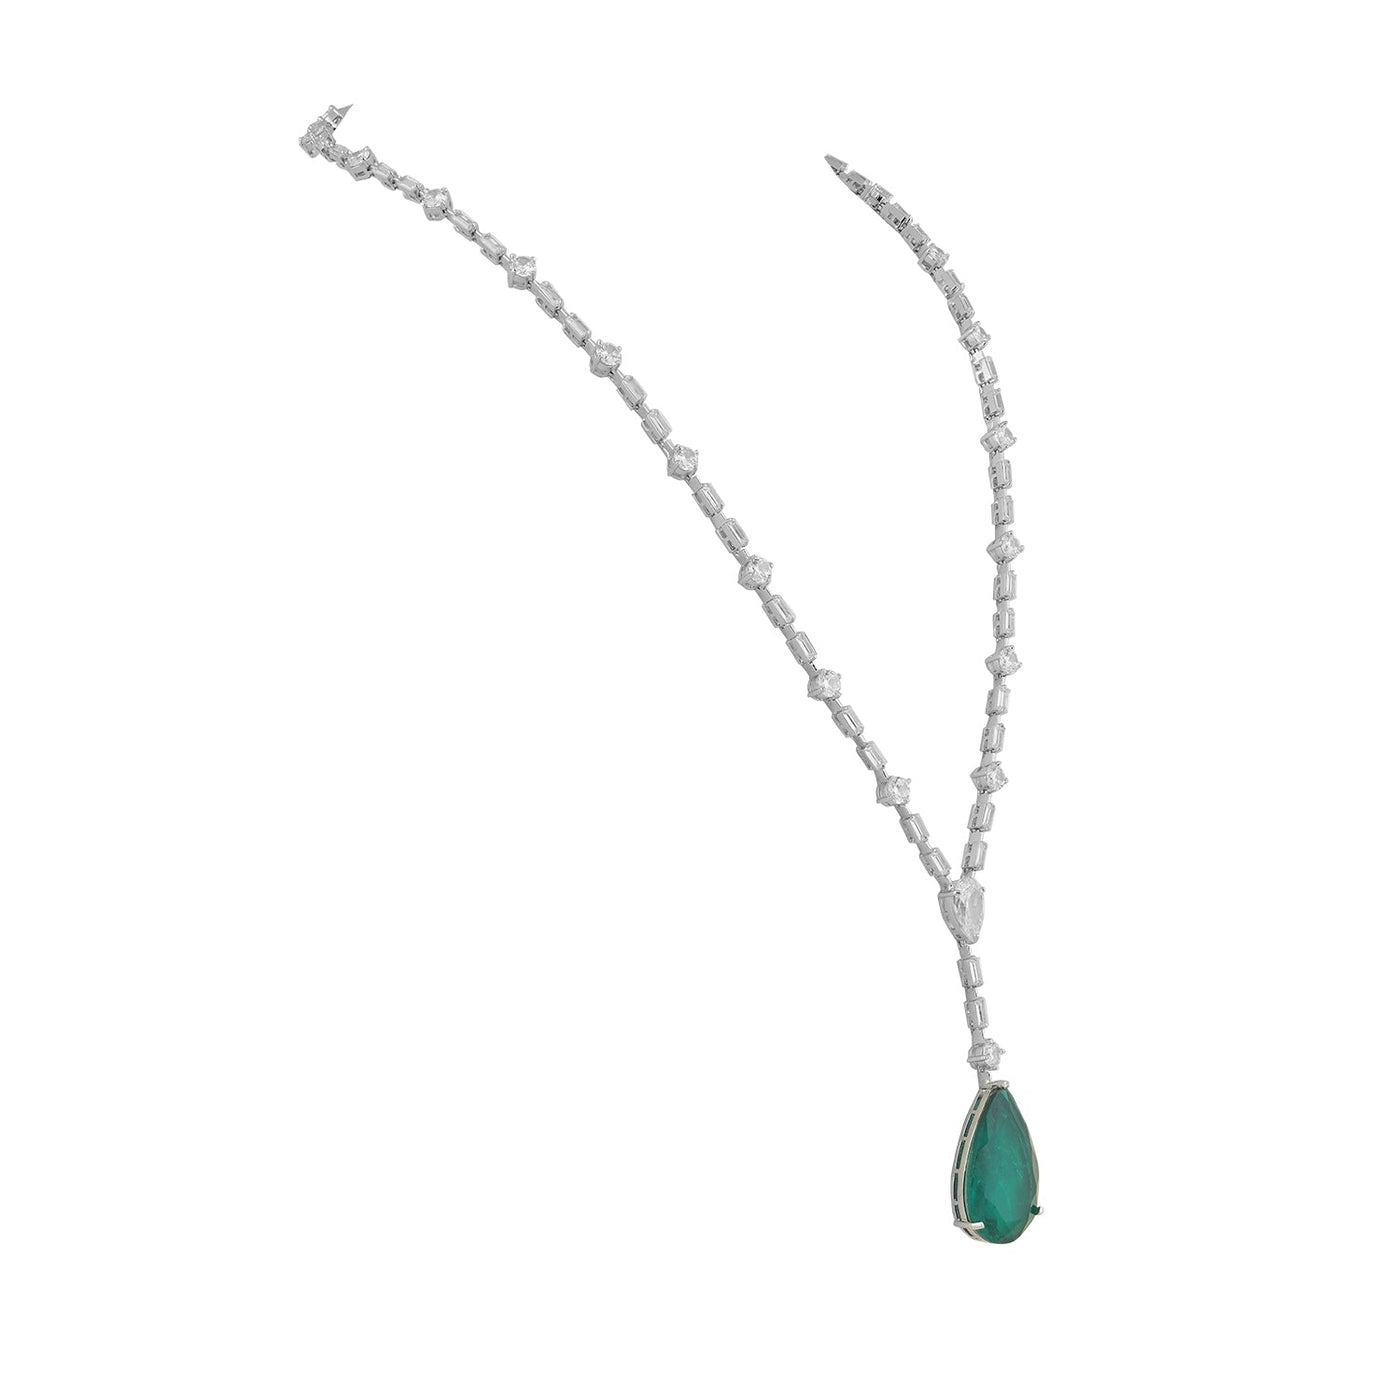 American Diamond and Emerald Green Stone Necklace Set